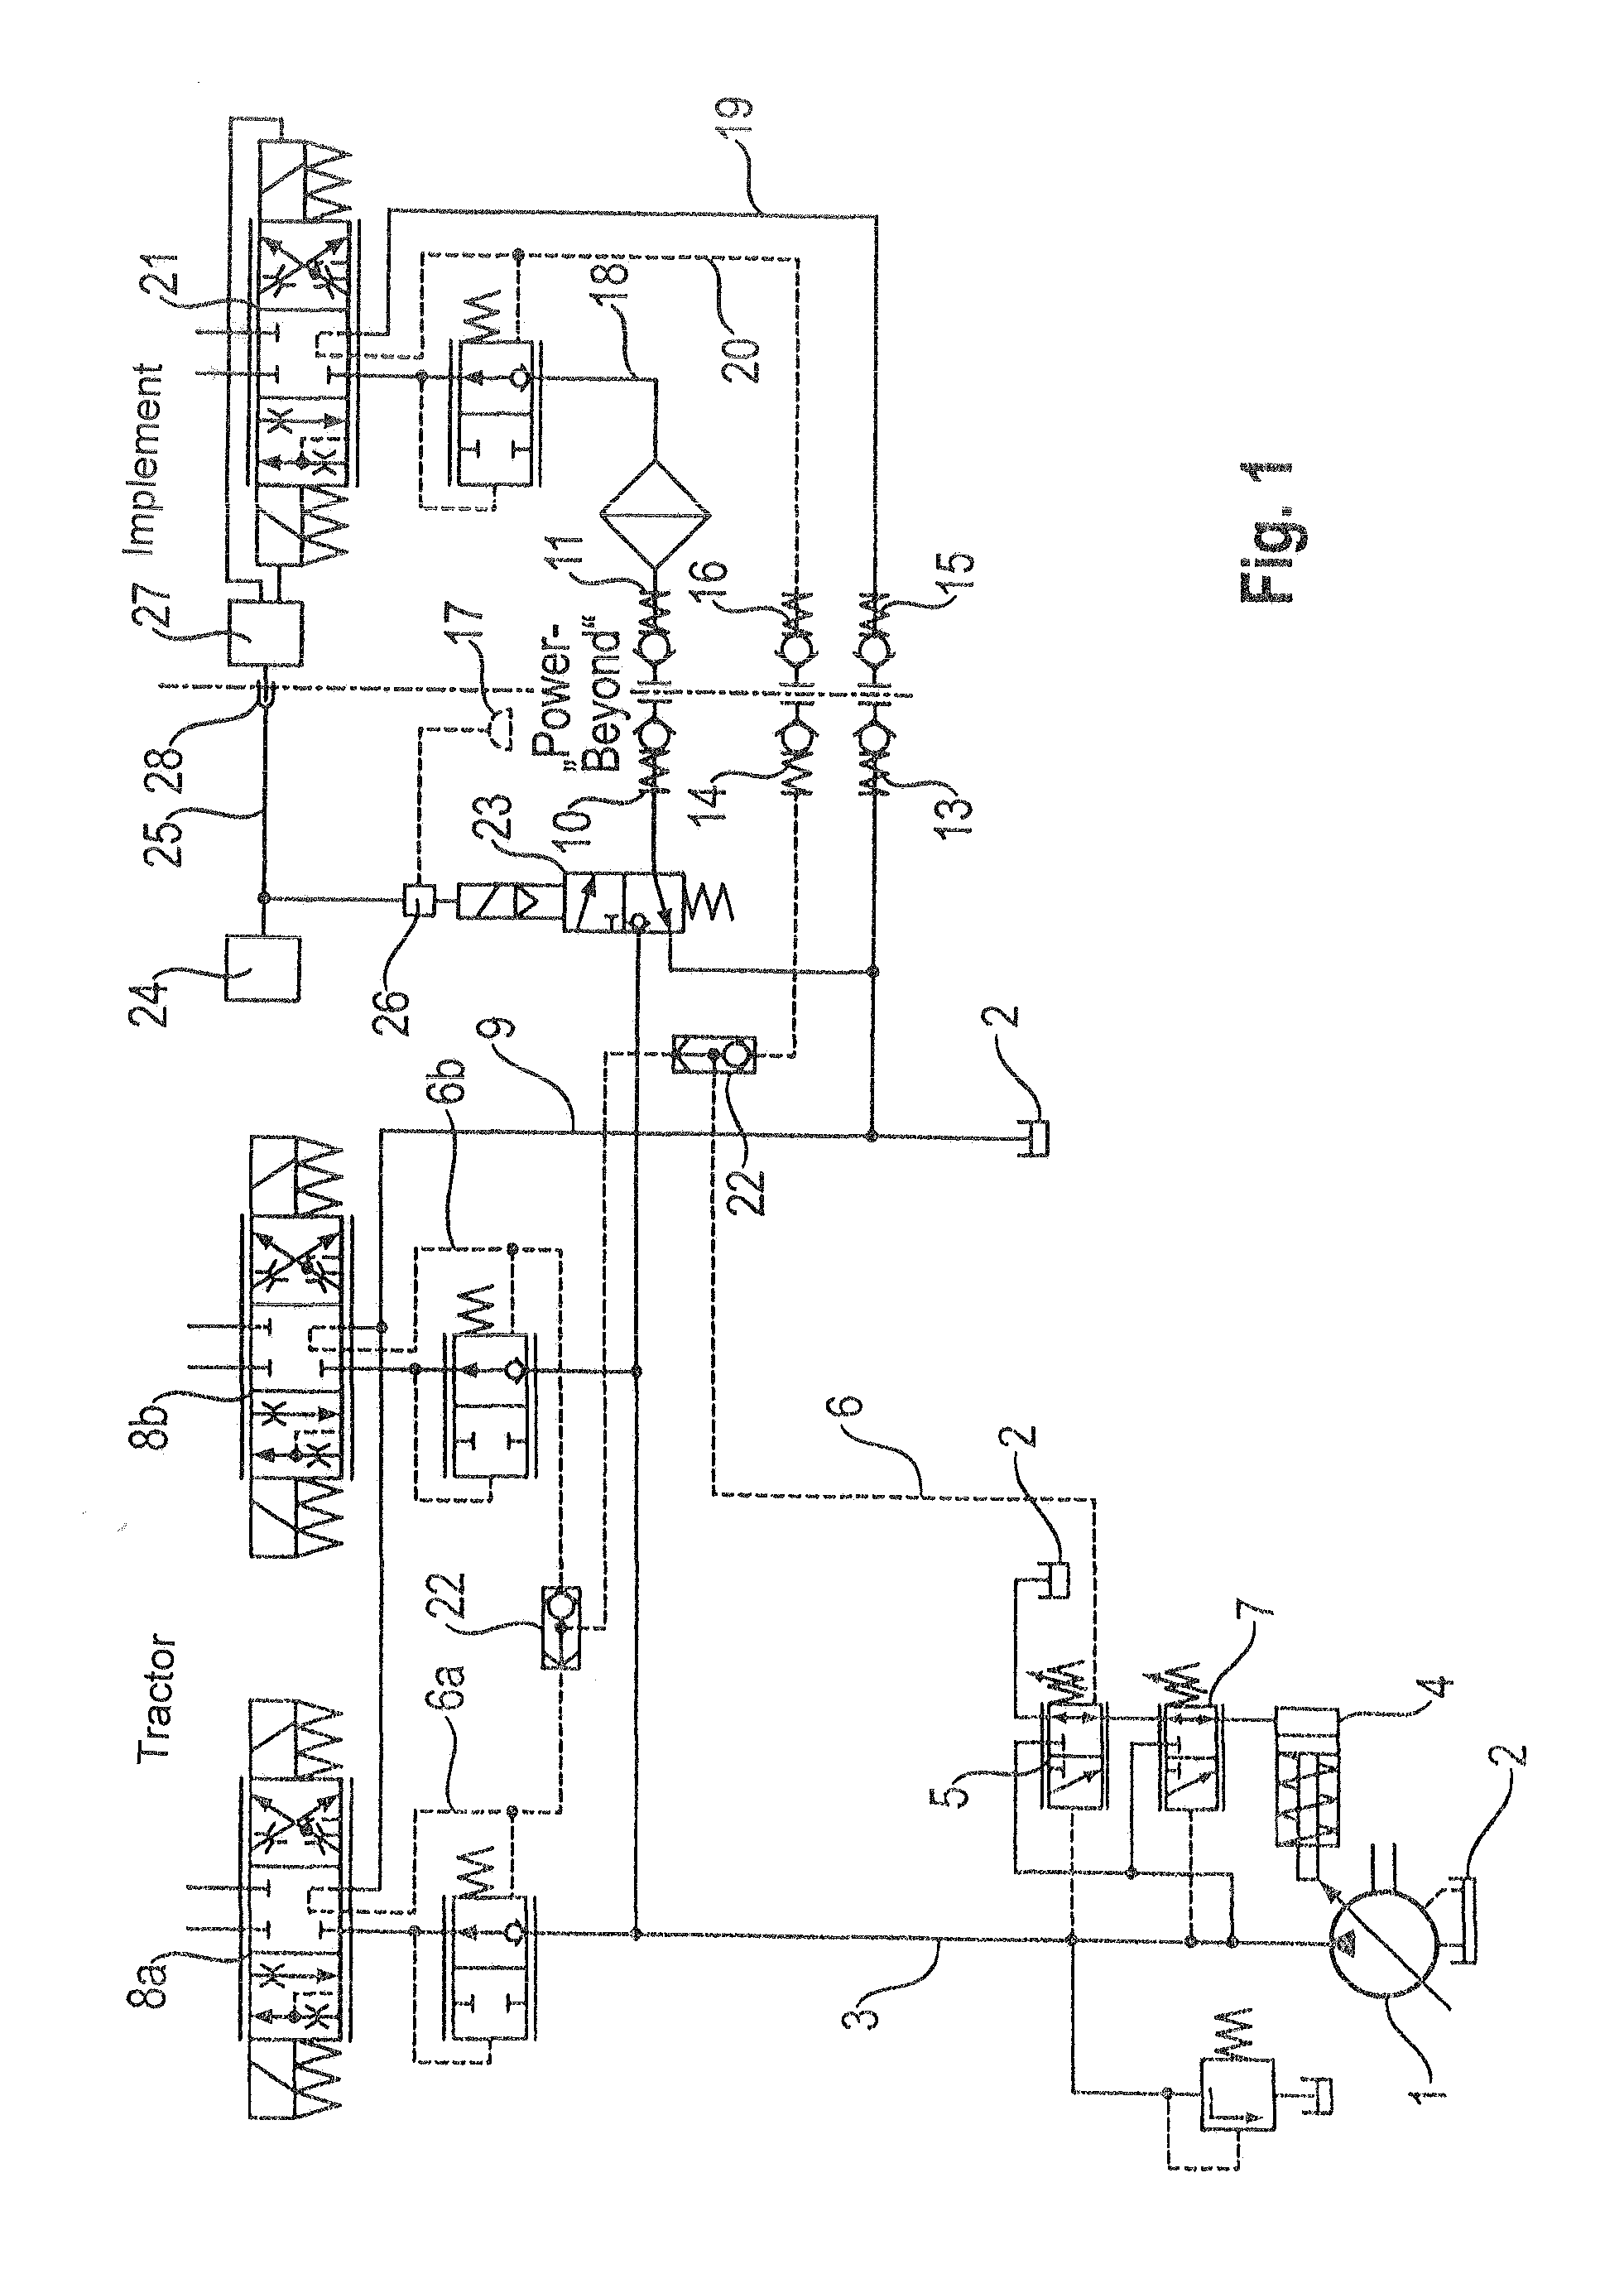 Vehicle comprising a mounted-implement coupling and mounted implement therefor